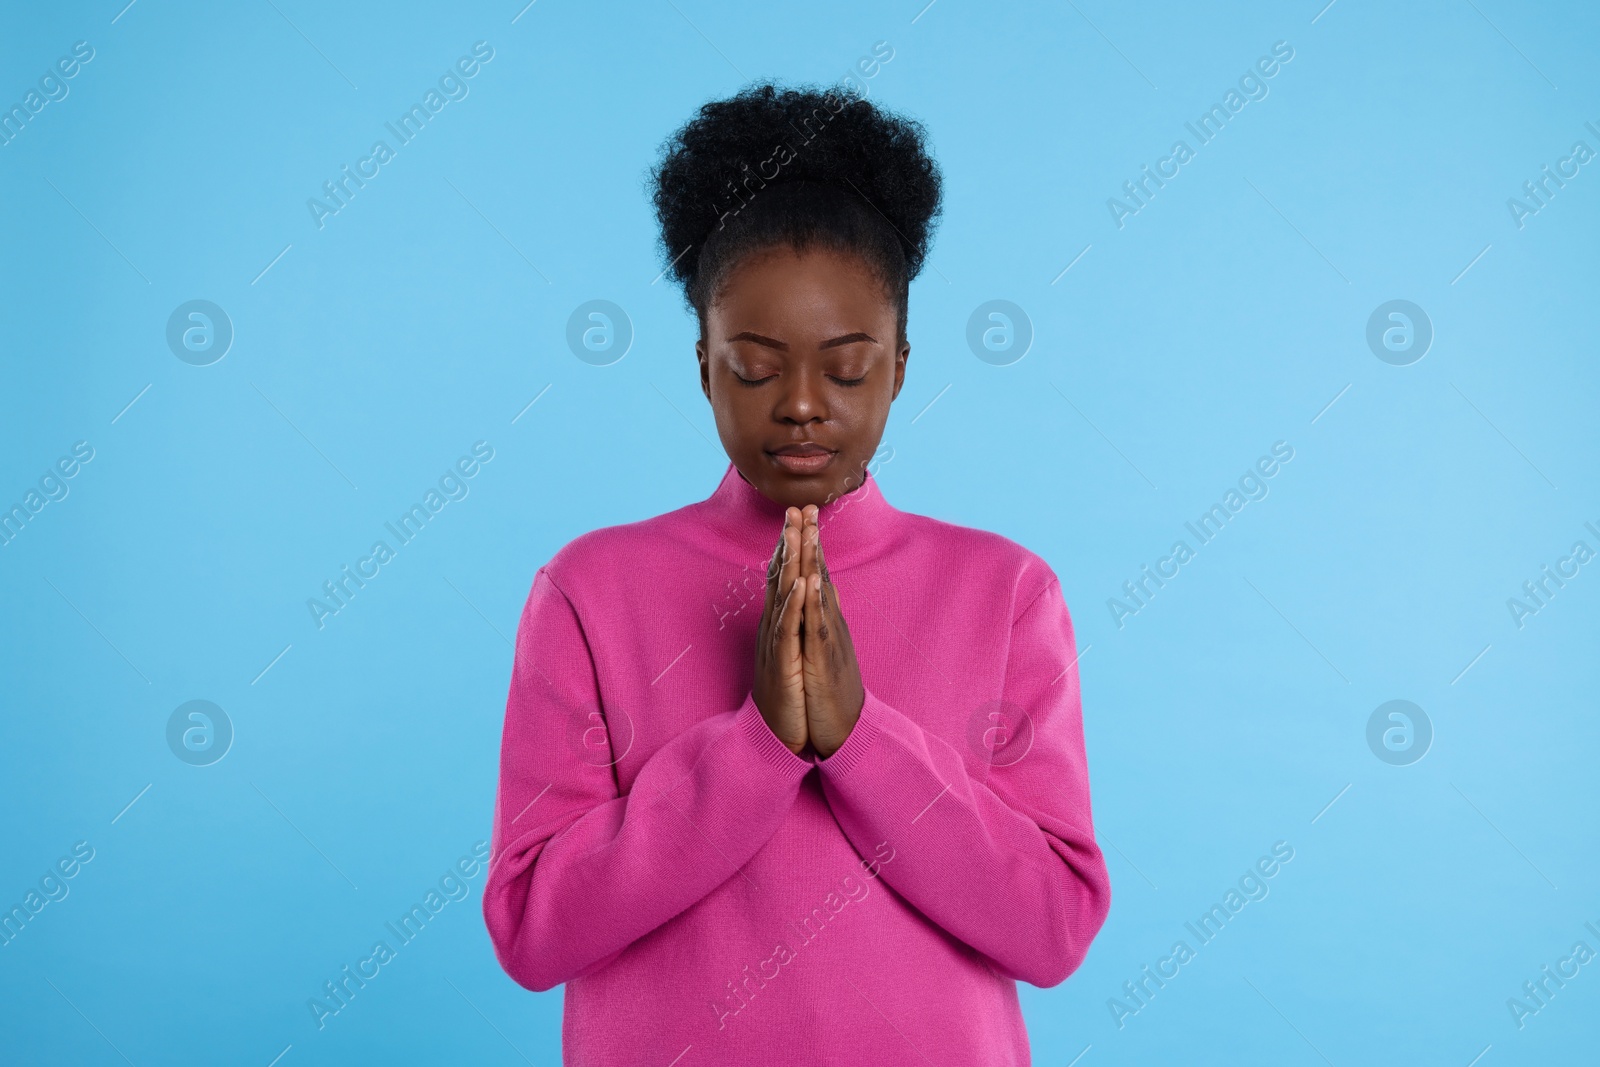 Photo of Woman with clasped hands praying to God on light blue background